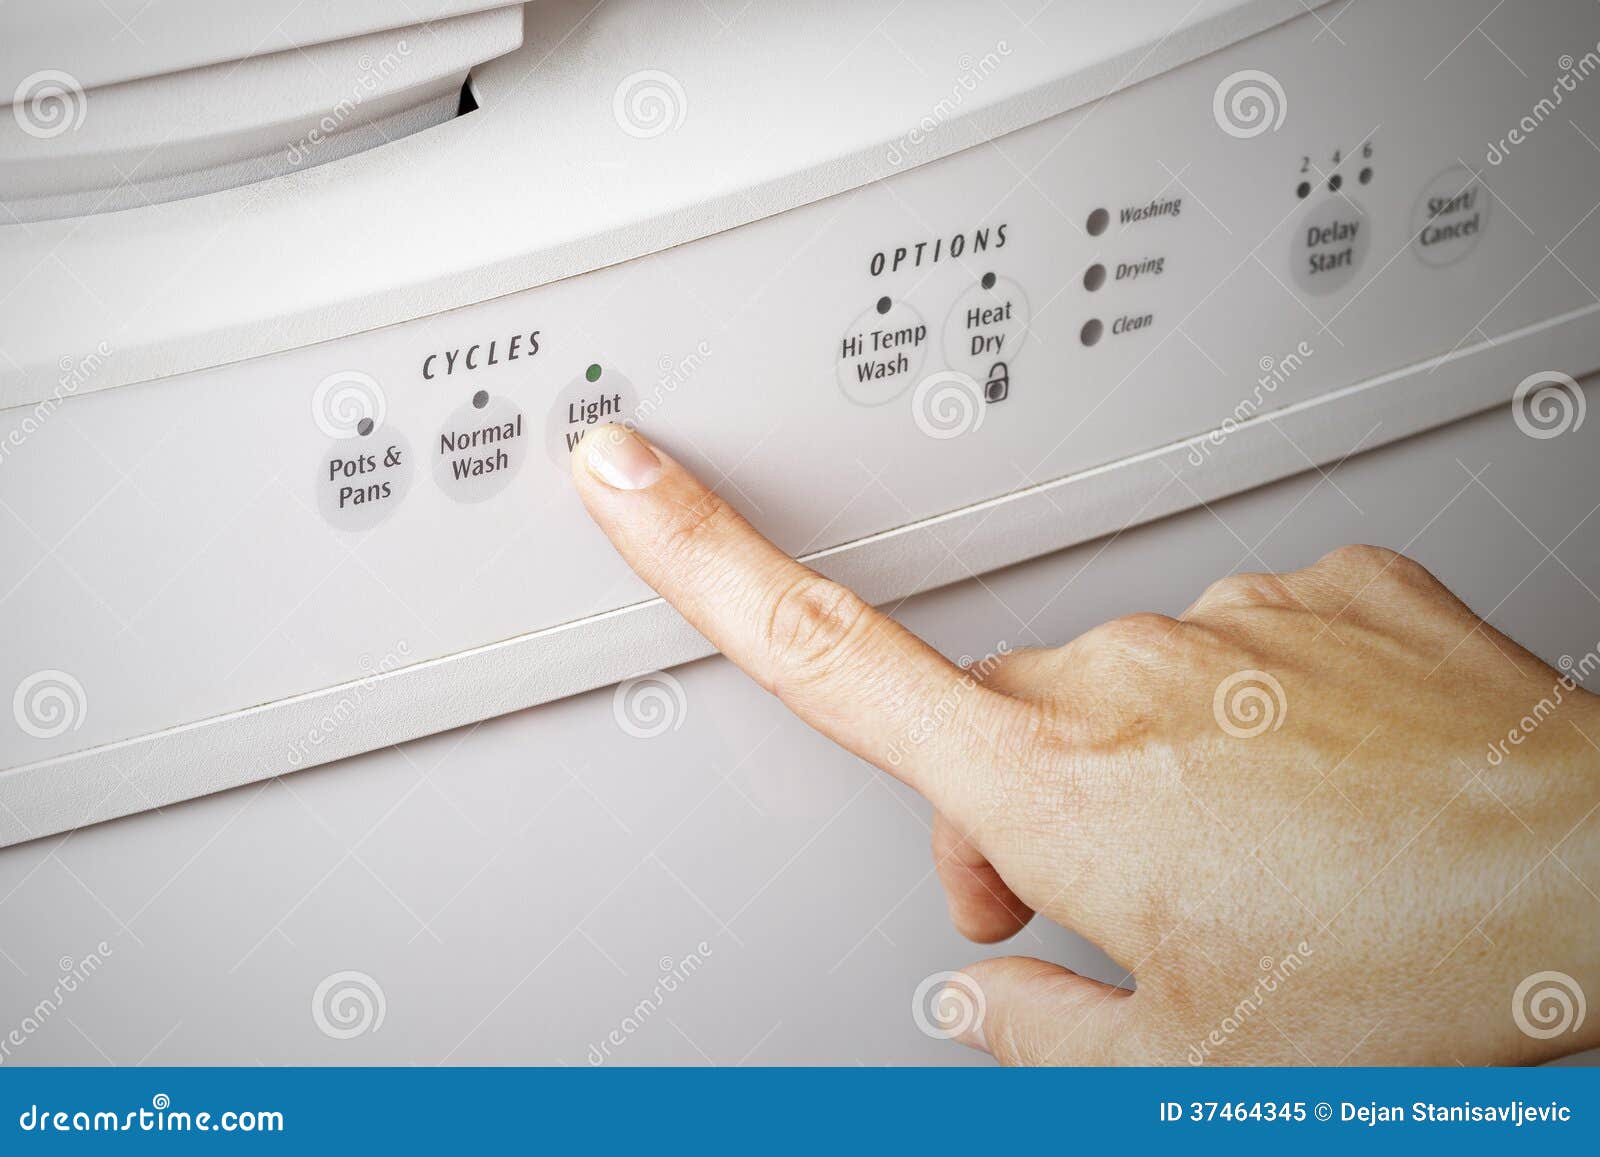 setting-the-dishwasher-cycle-to-light-wash-energy-efficient-concept